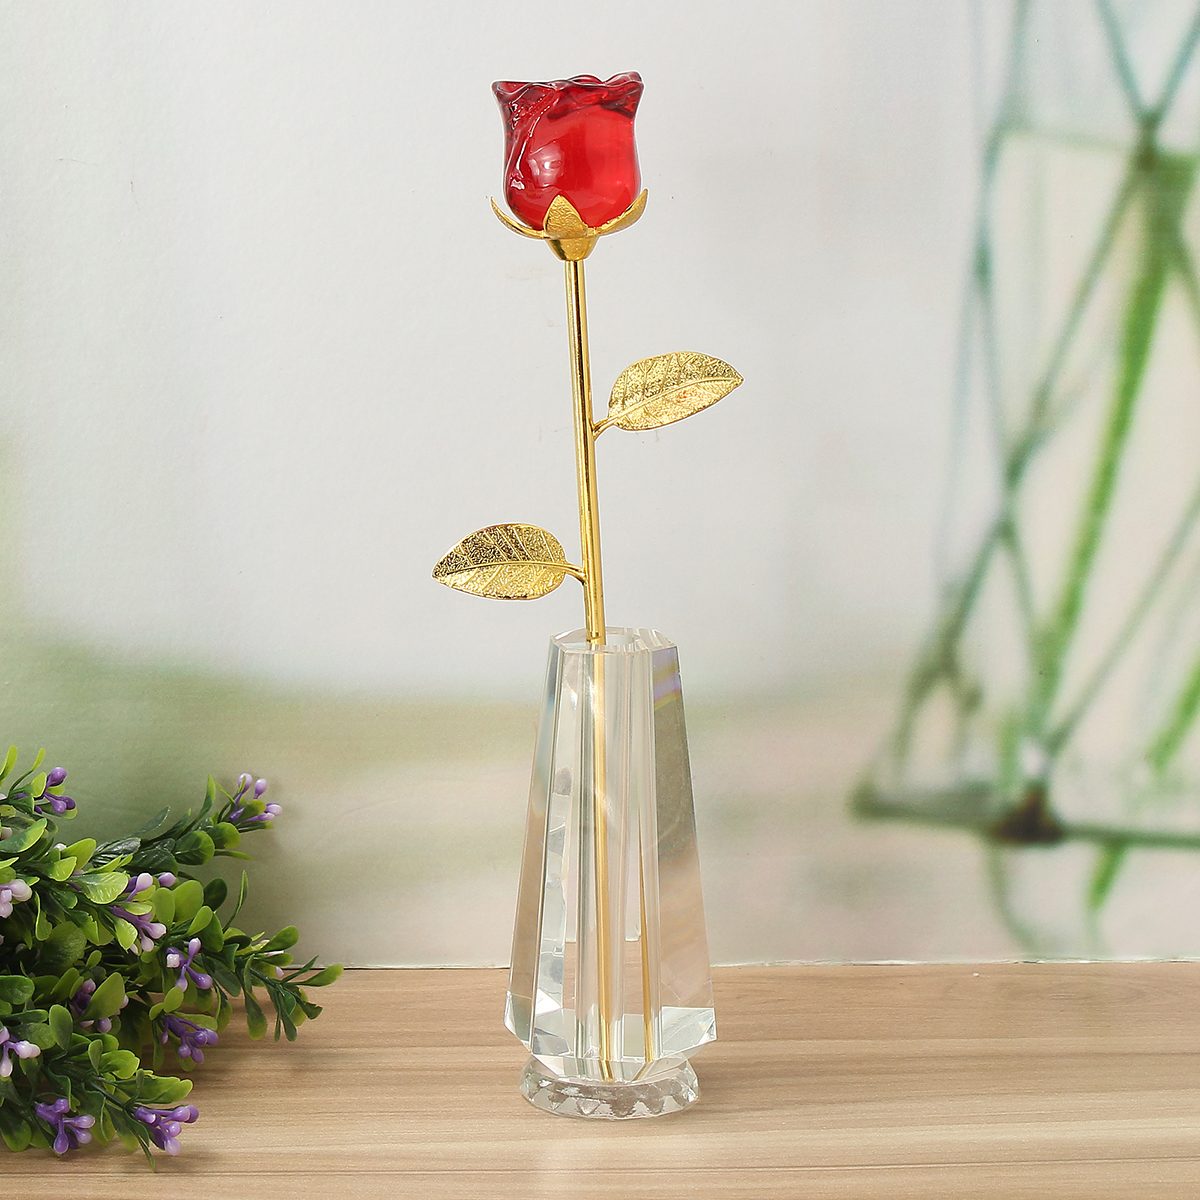 Crystal-Glass-Golden-Roses-Flower-Ornament-Valentine-Gifts-Present-with-Box-Home-Decorations-1430314-8